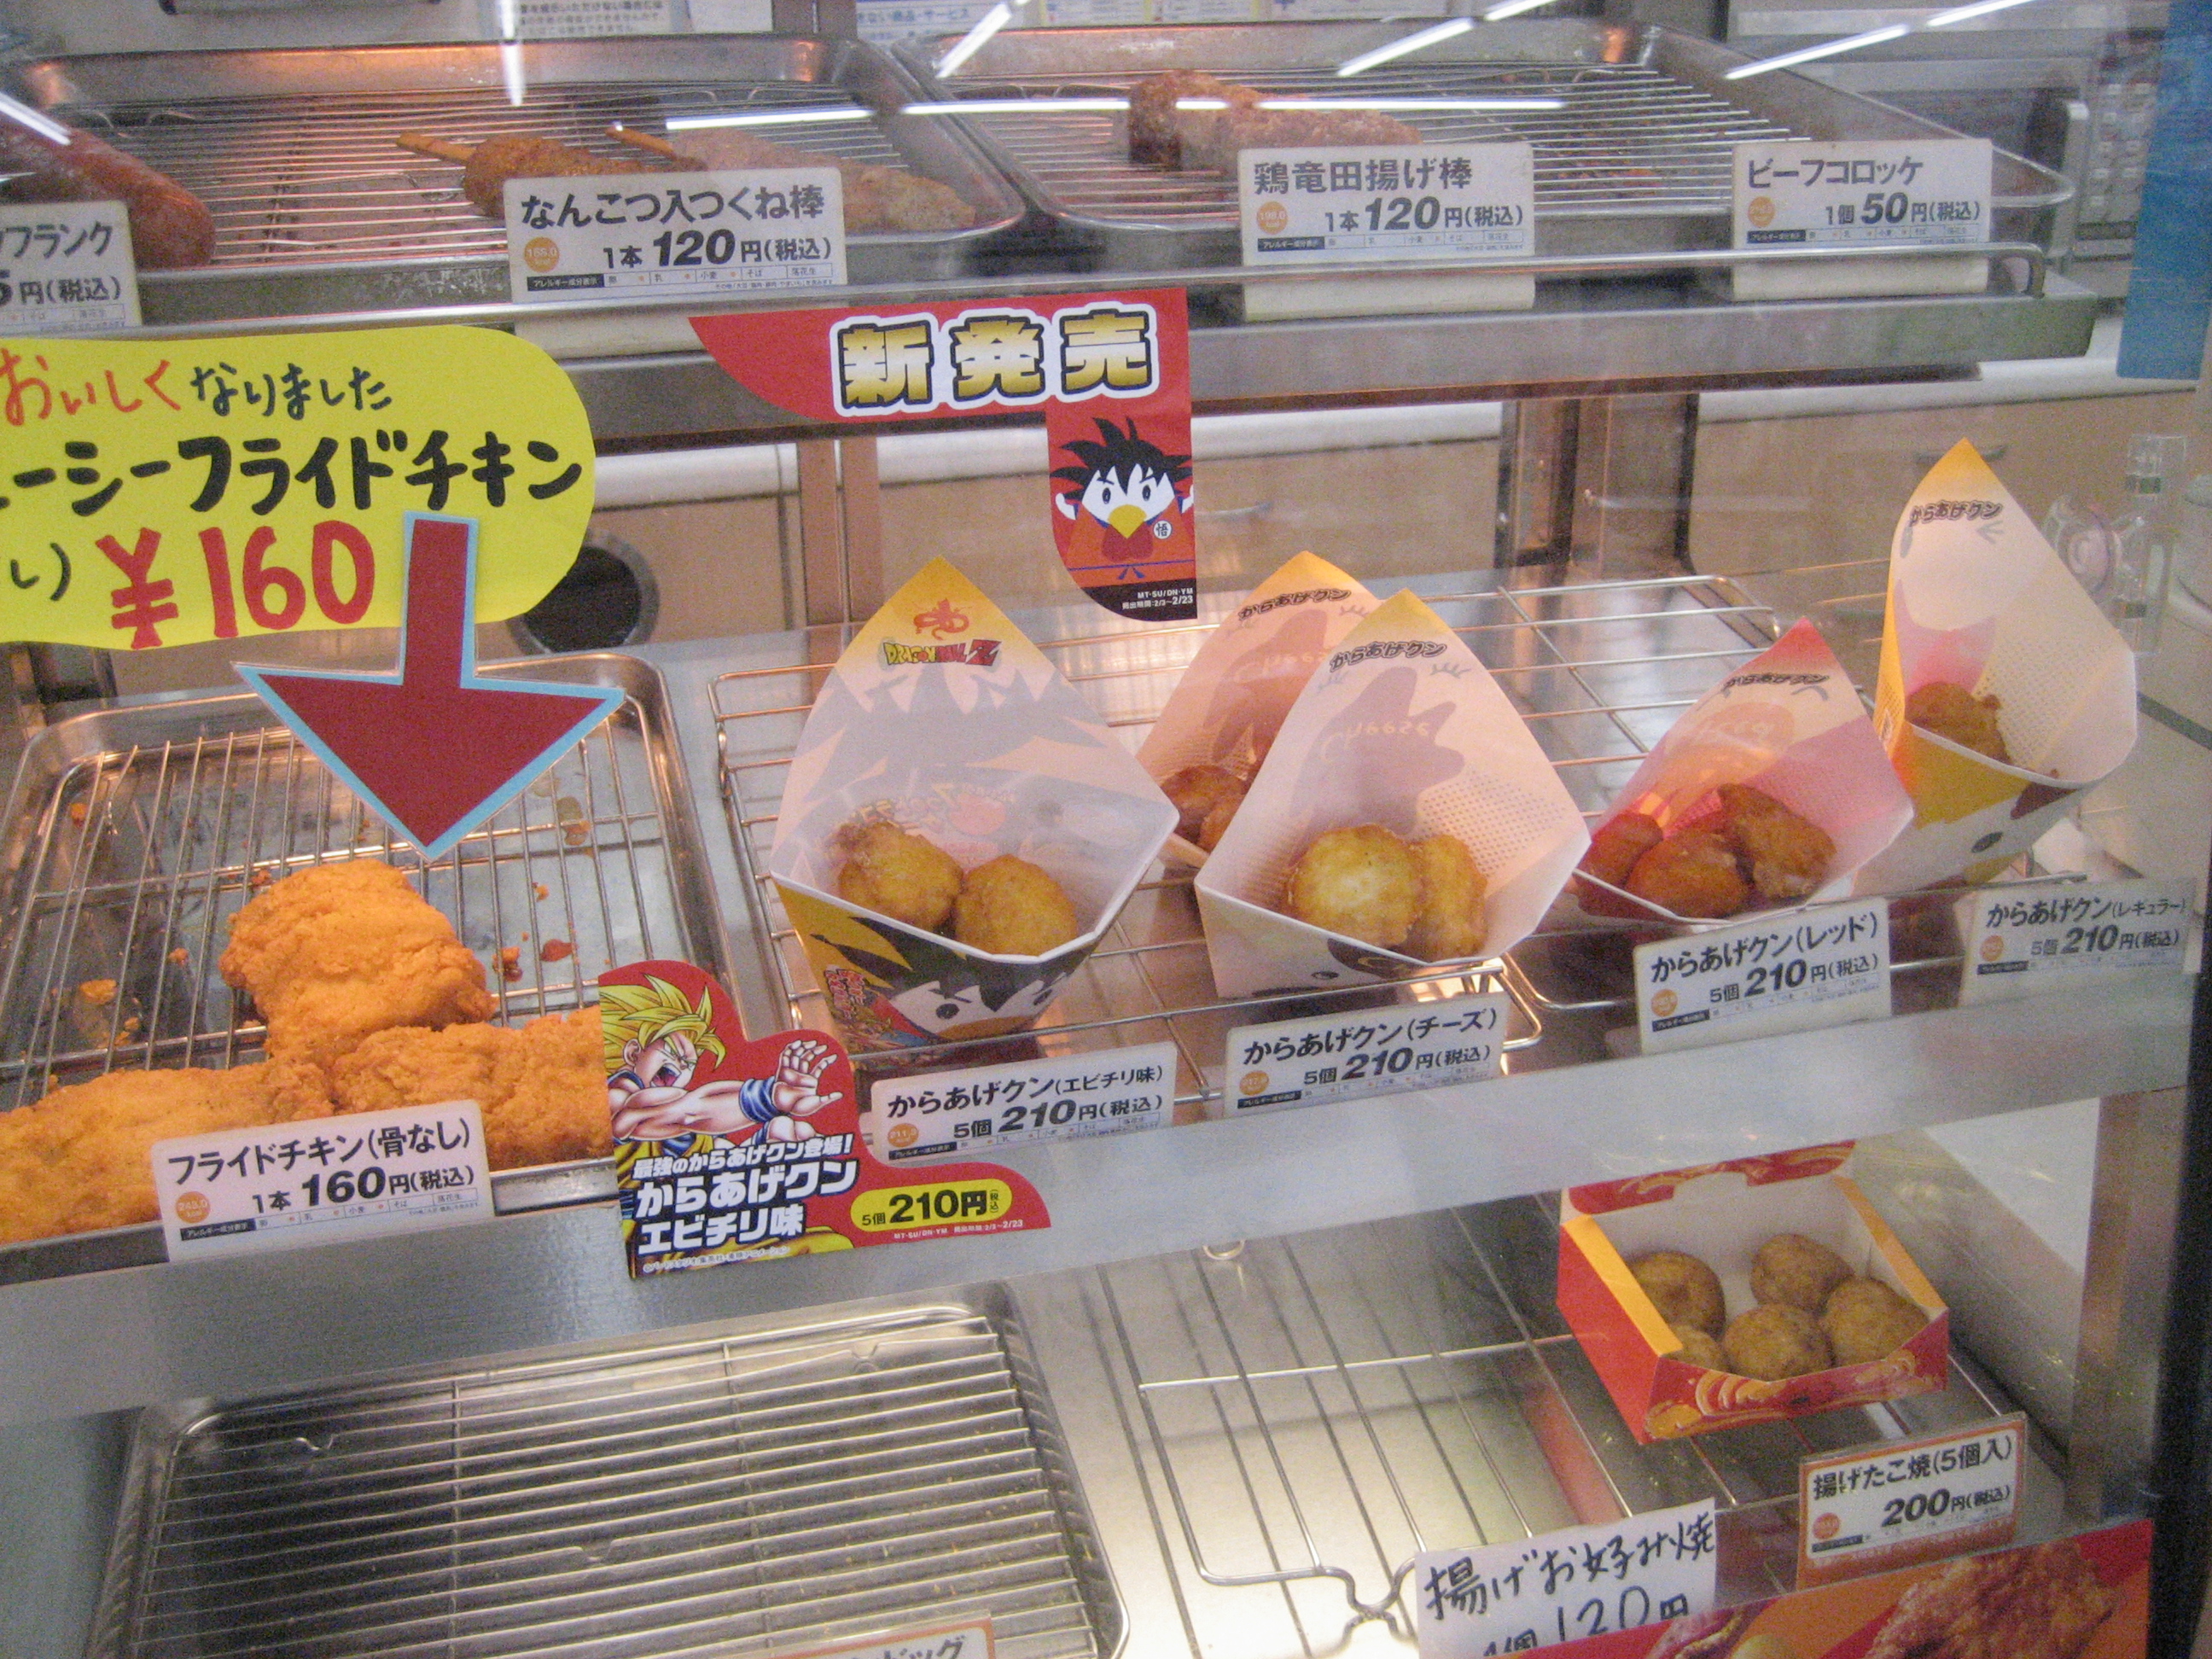 Fast_foods_of_Lawson_convenience_store